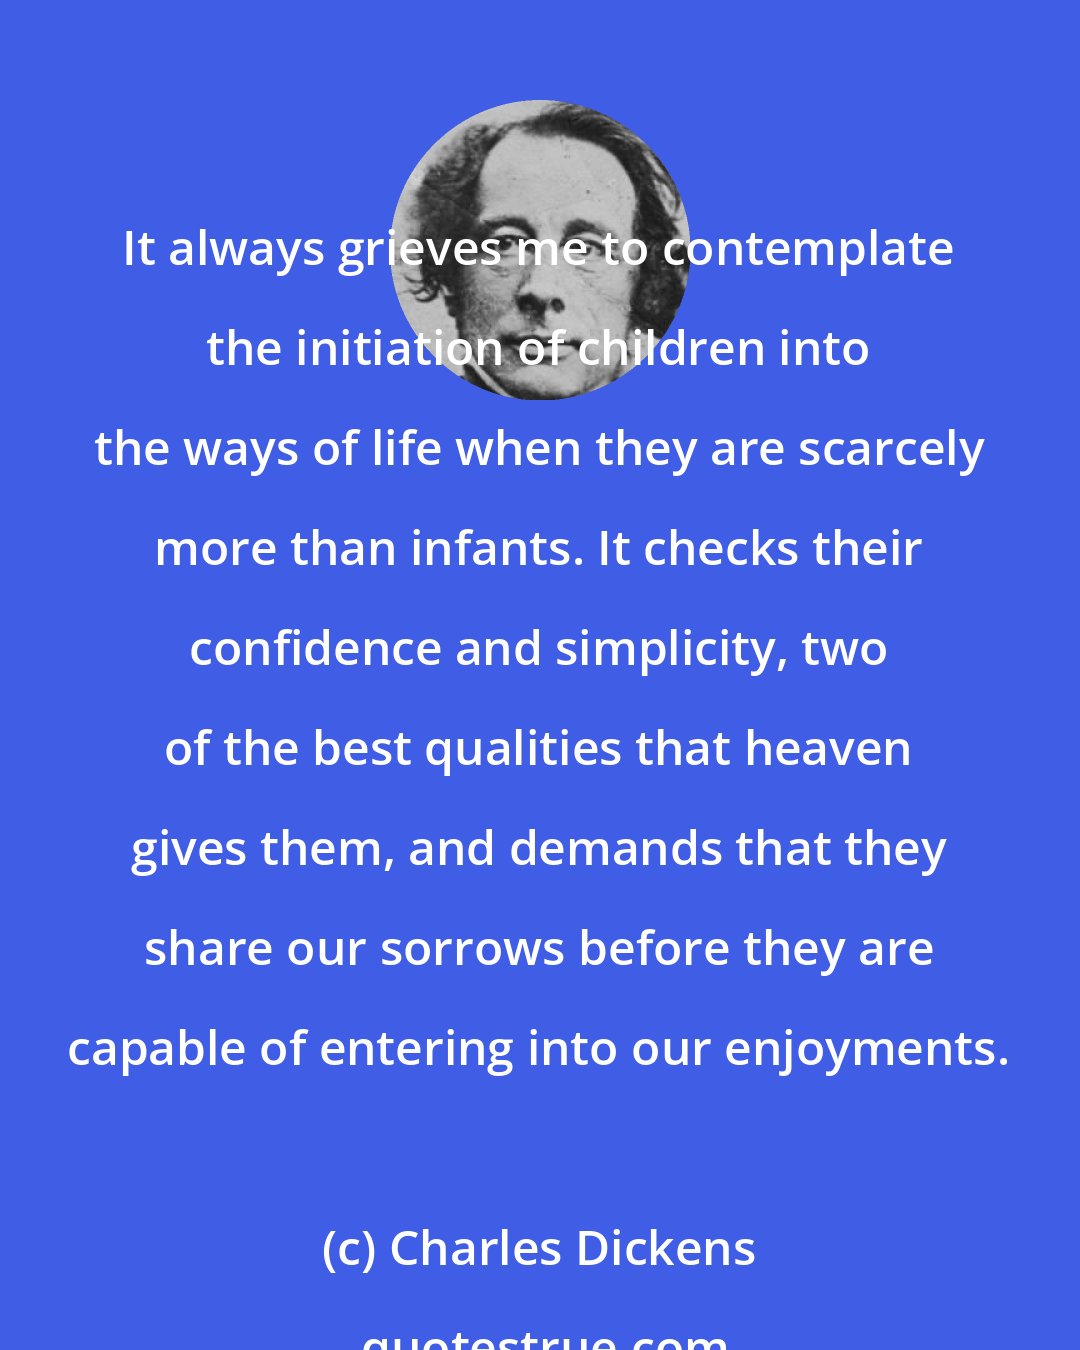 Charles Dickens: It always grieves me to contemplate the initiation of children into the ways of life when they are scarcely more than infants. It checks their confidence and simplicity, two of the best qualities that heaven gives them, and demands that they share our sorrows before they are capable of entering into our enjoyments.